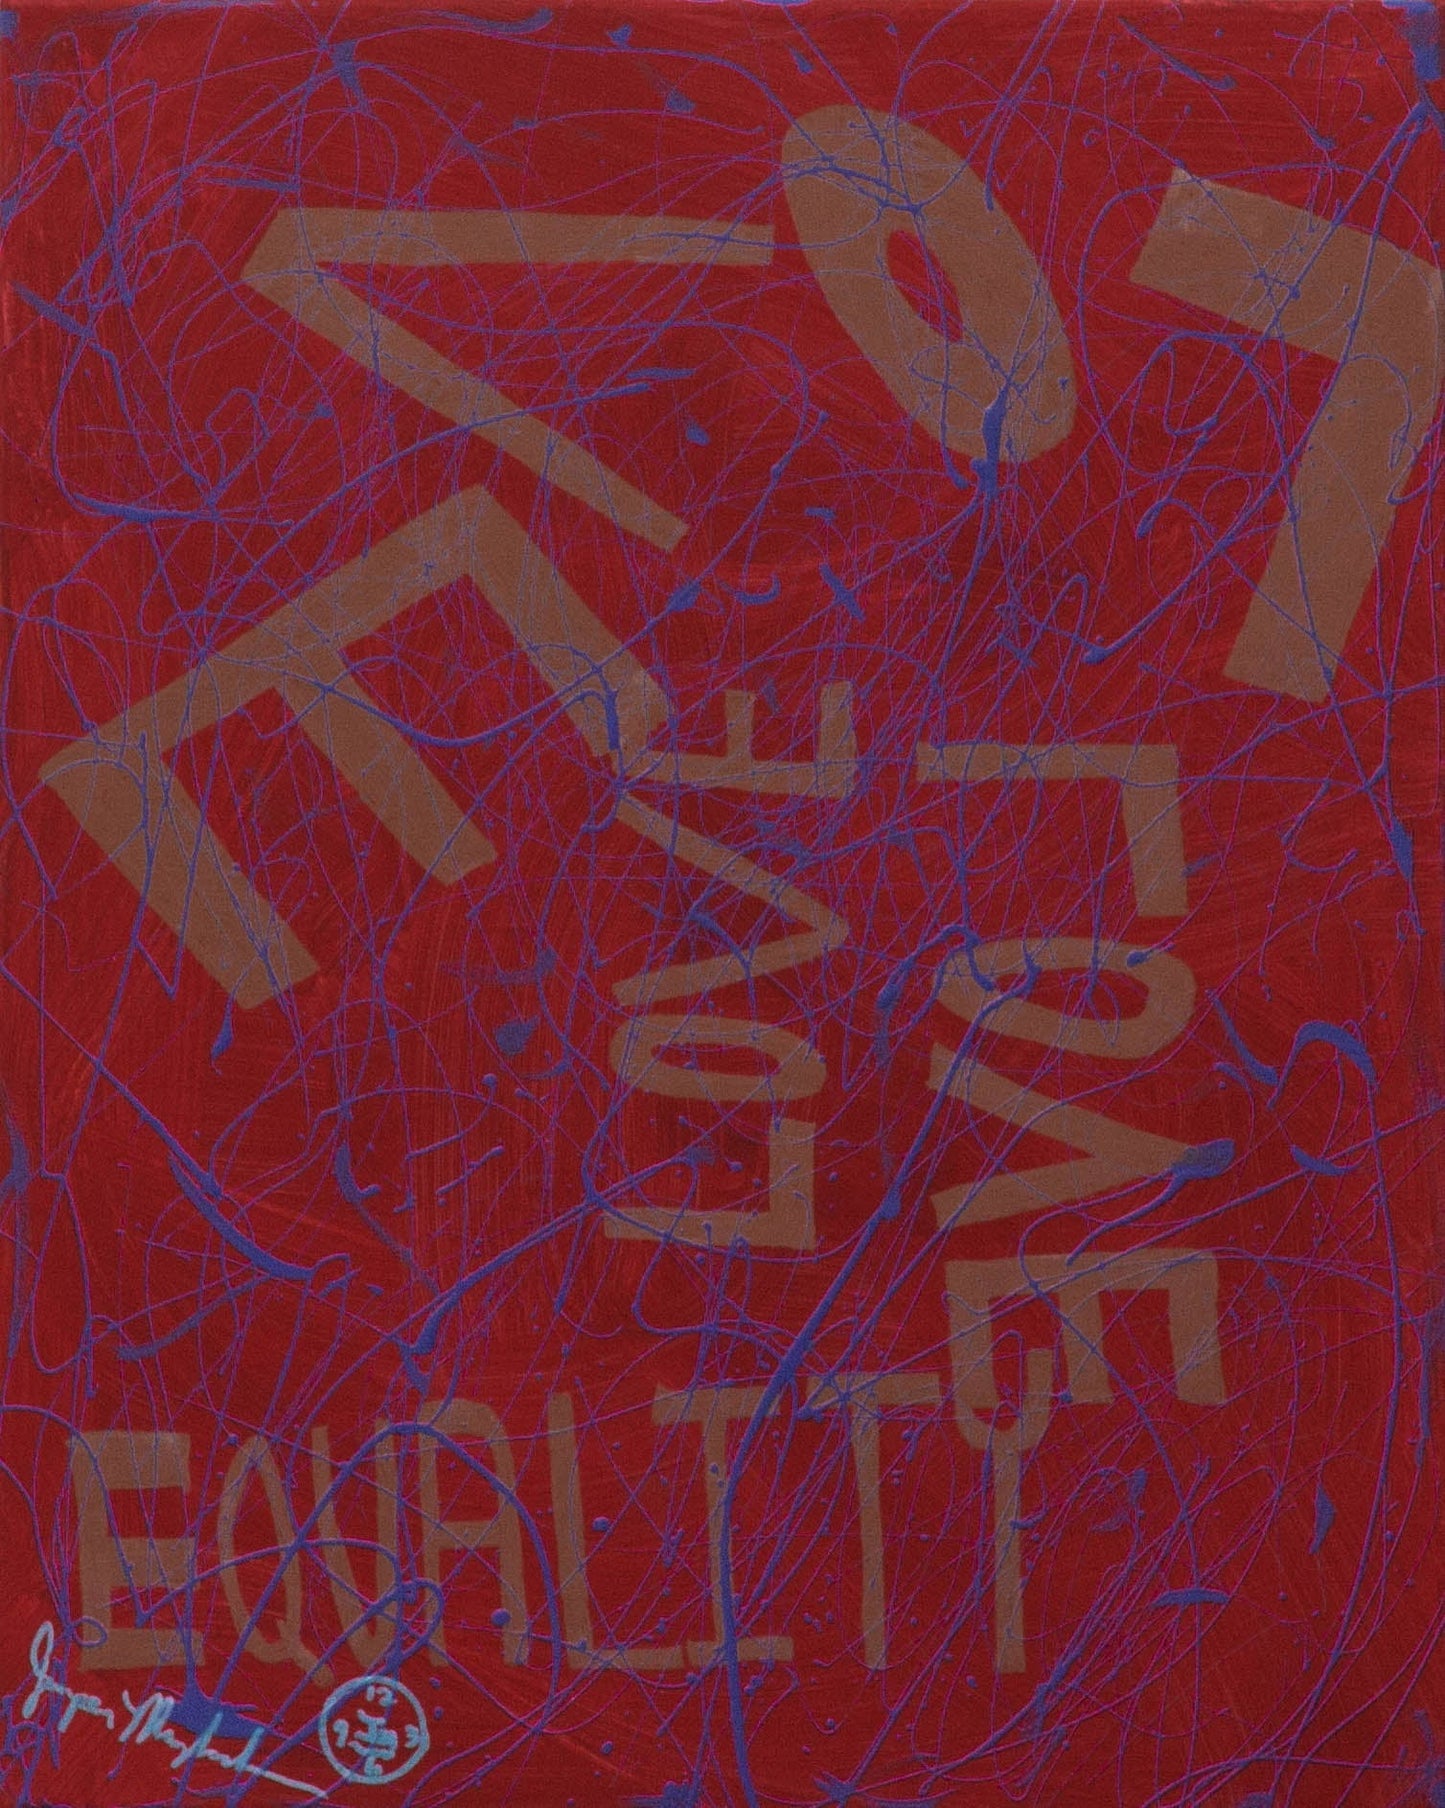 Equality by Jumper Maybach
From the Pride Series
We must Love for equality
16" x 20"
Acrylic Mixed media on canvas

Do you own a Jumper Maybach, yet?®
Seek LOVE, PEAEquality        PNTArtworkJumper MaybachJumper Maybach